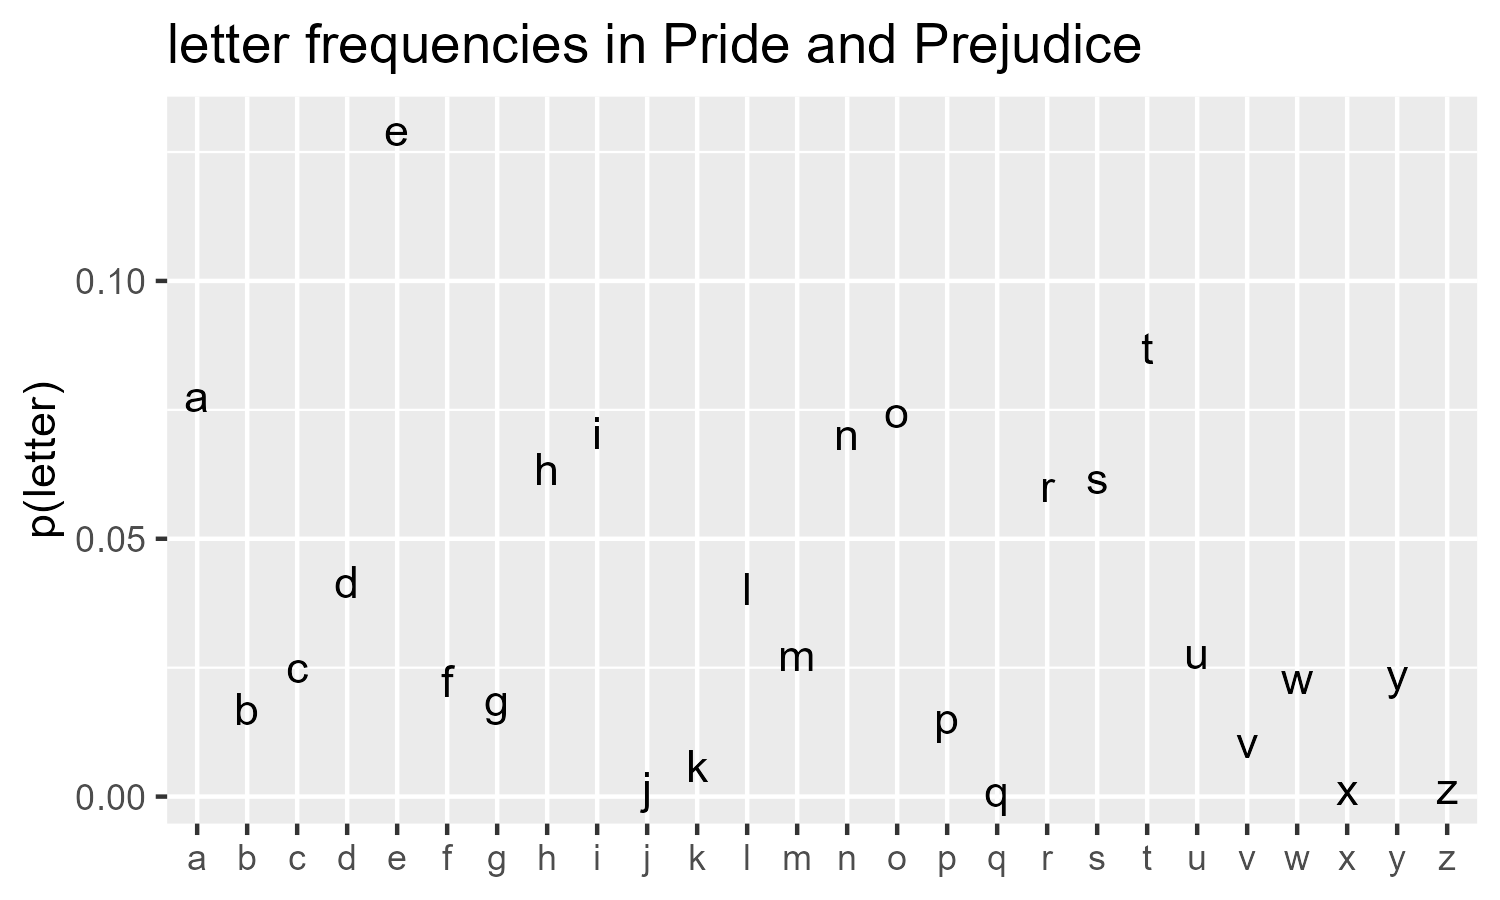 Letter frequencies in Pride and Prejudice